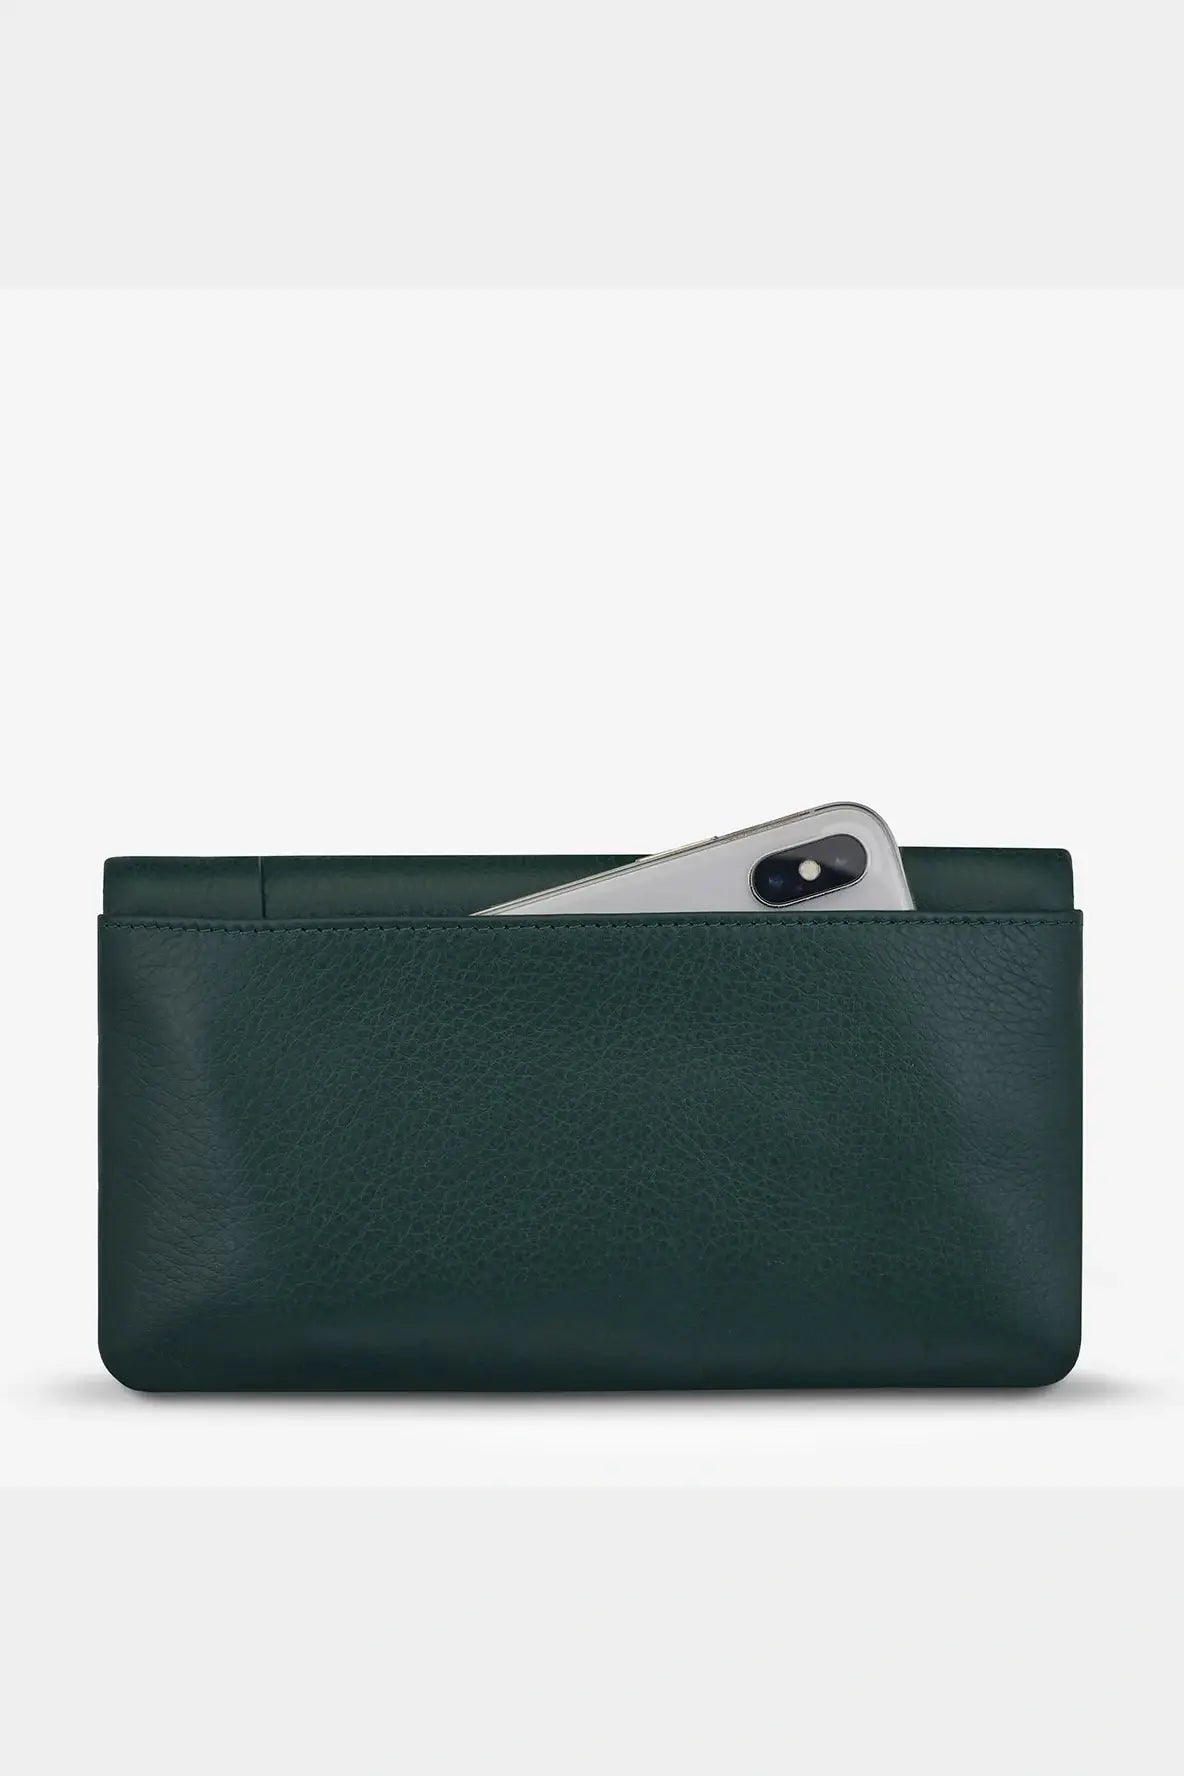 Status anxiety some type of love wallet - teal